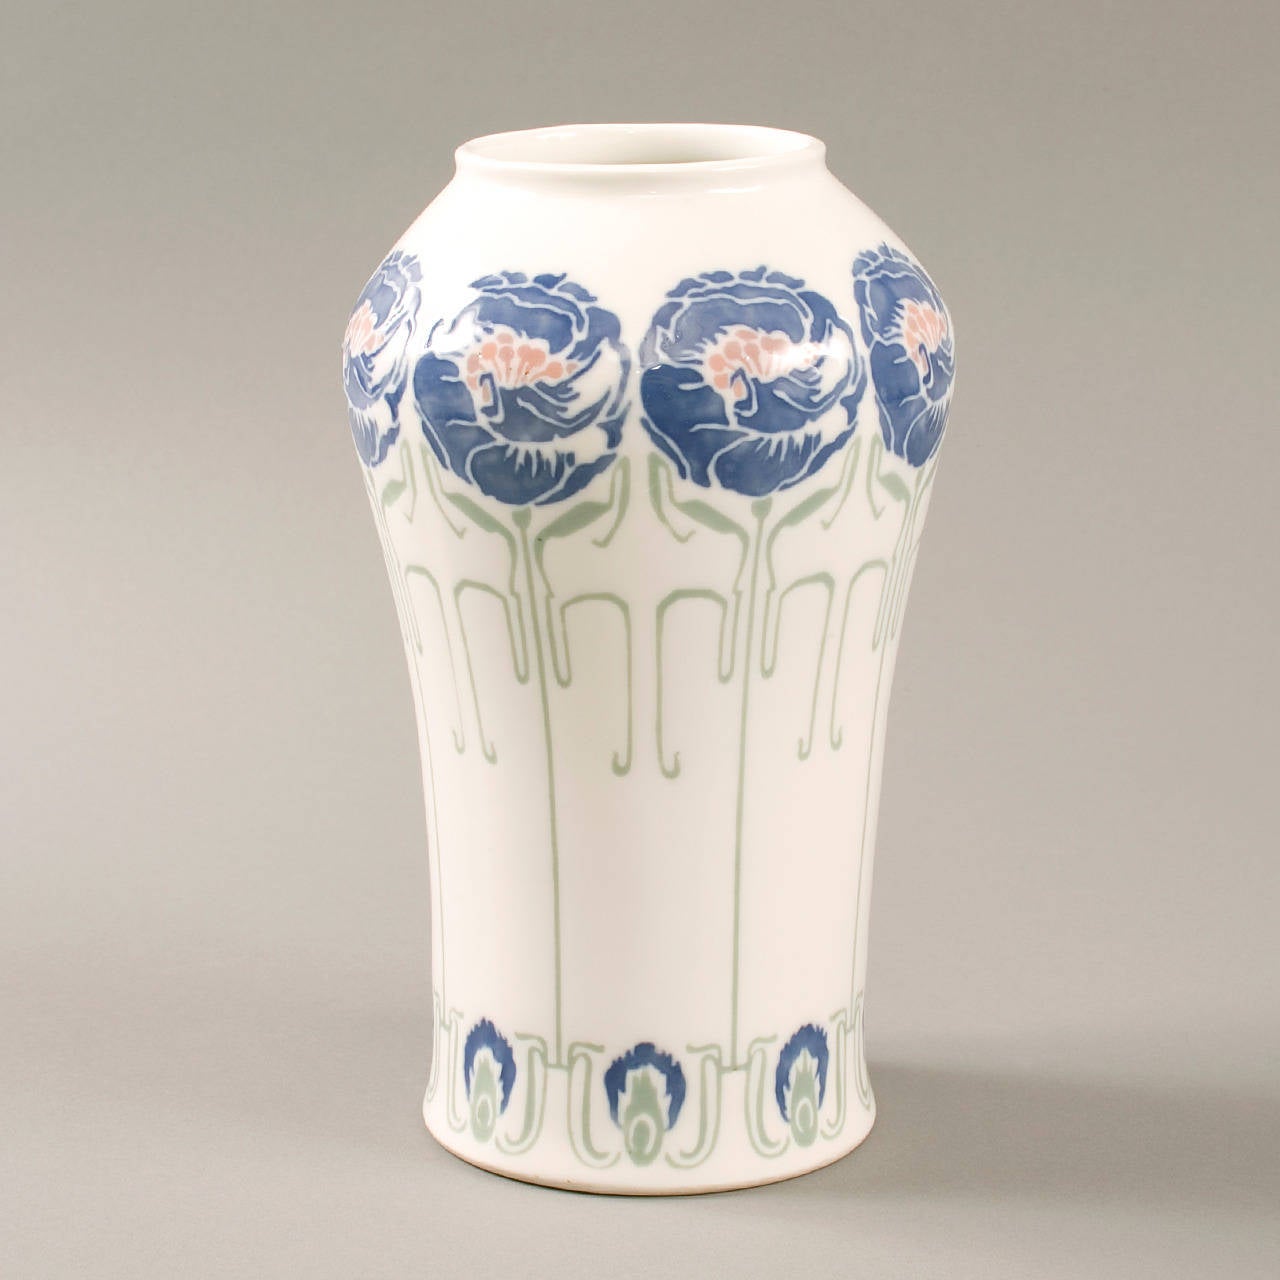 A French Art Nouveau ceramic vase produced for Bing by George de Feure, Gérard, Dufraisseix and Abbott. The porcelain vase features floral decoration carried out in biscuit, blue enamel, pink and green, white zone. Signed 